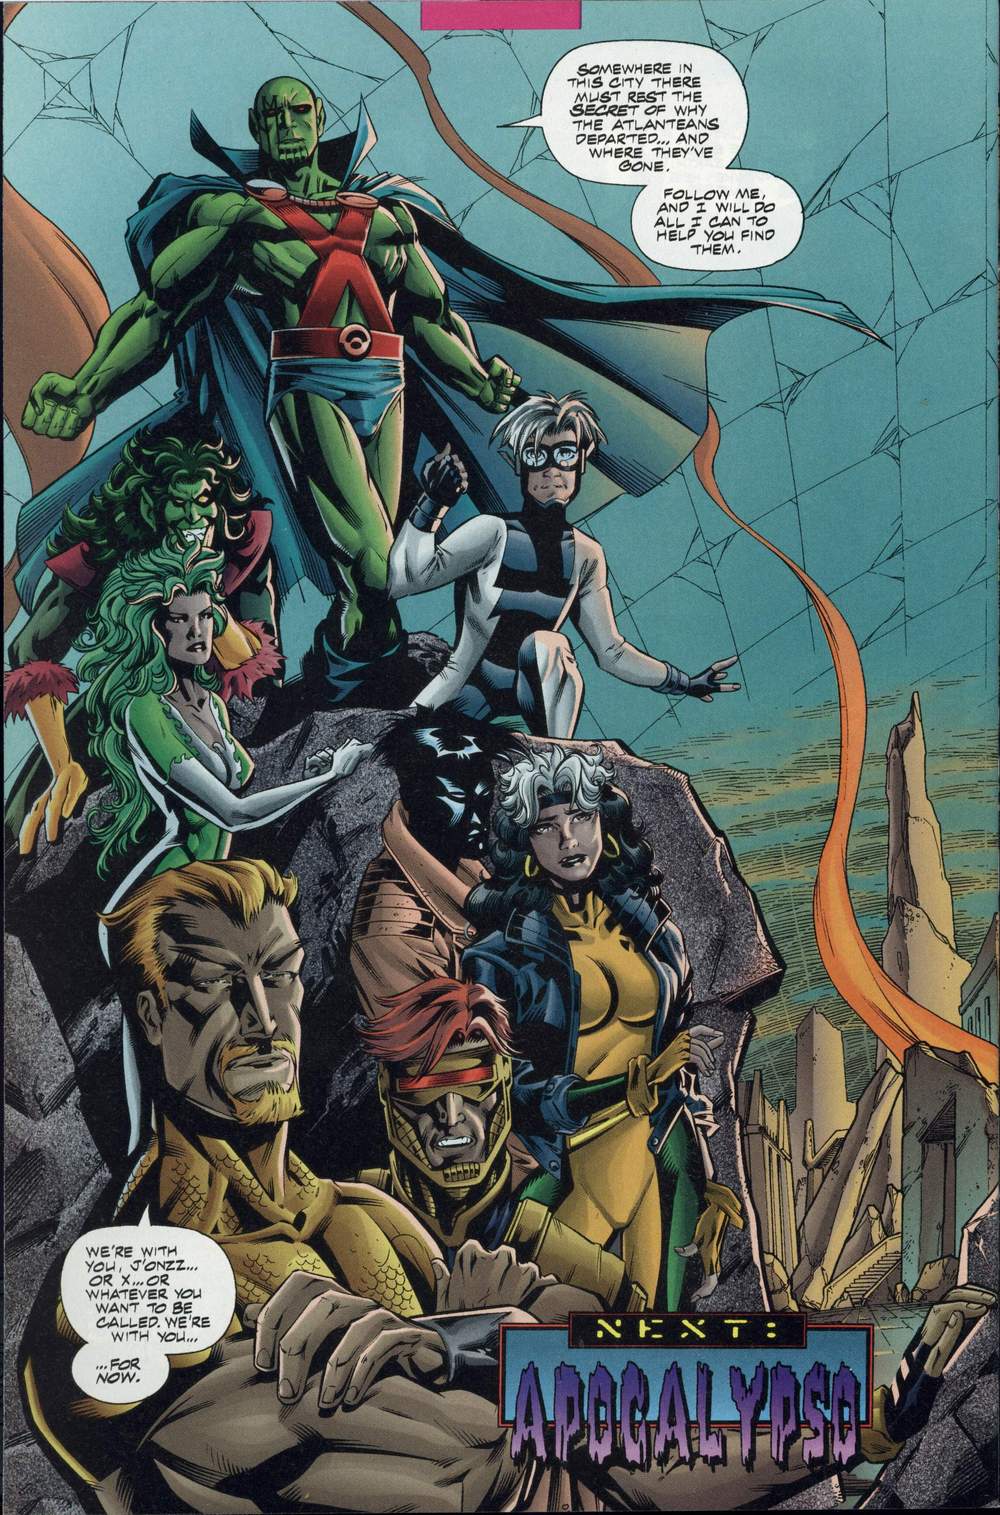 (Clockwise from top) Mister X, Mercury, Wraith, Runaway, Apollo, Firebird, and Nightcreeper prepare to save Atlantis in JLX Vol. 1 #1 "A League of Their Own!" (1996), Marvel Comics/DC. Words by Mark Waid and Gerard Jones, art by Howard Porter, John Dell, Gloria Vasquez, and Chris Eliopoulous.